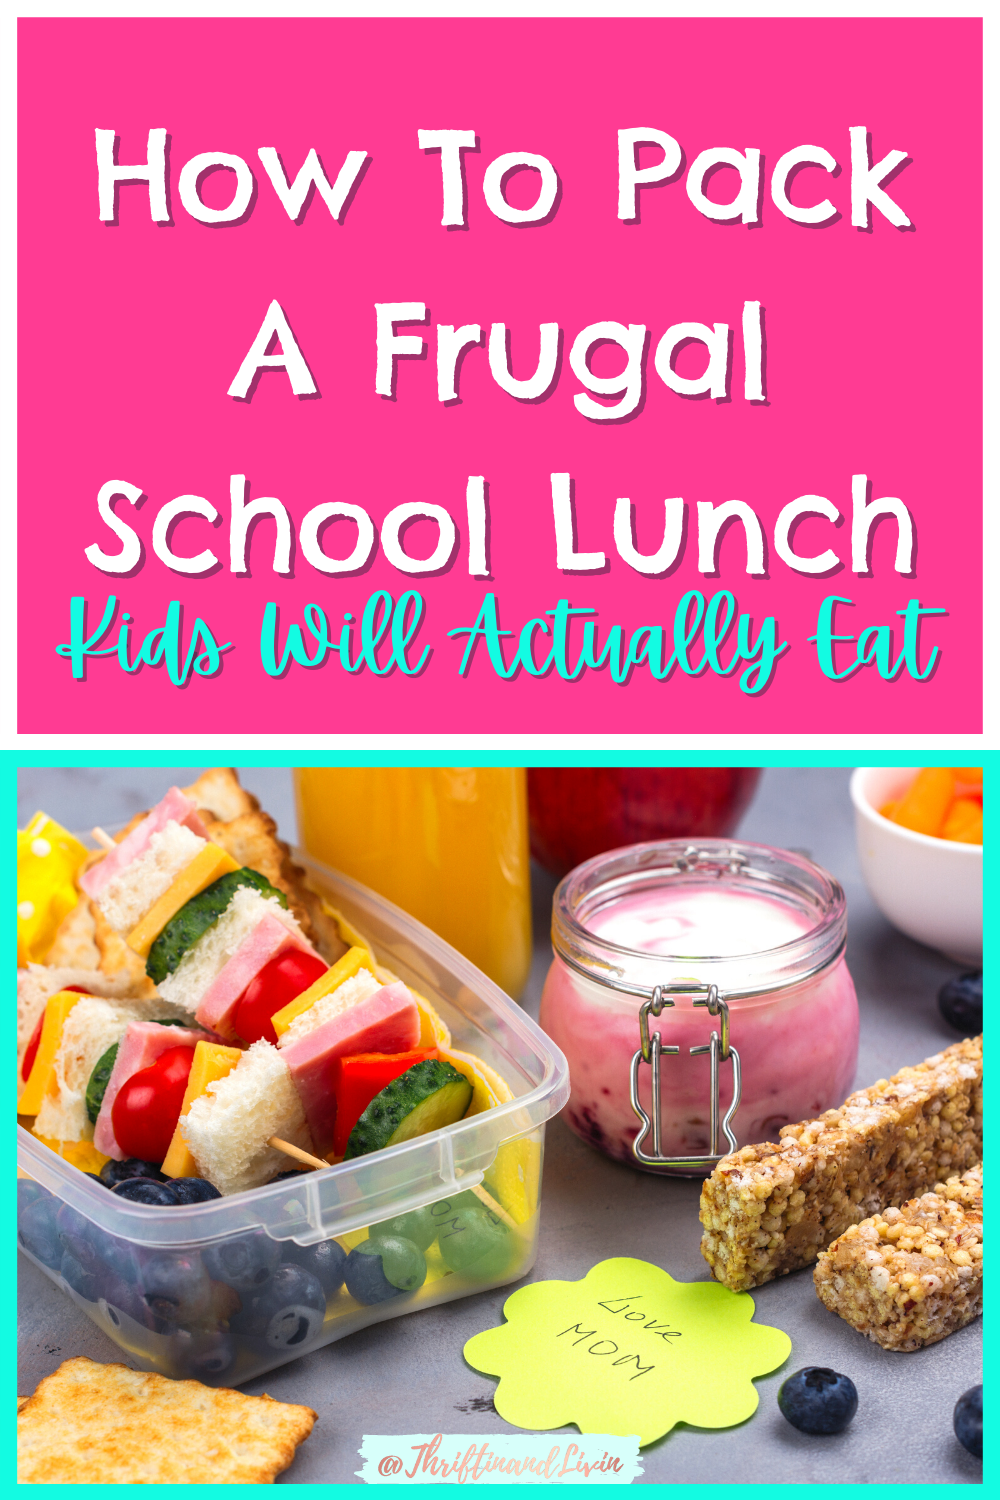 Pinterest Image - How To Pack A Frugal School Lunch Kids Will Actually Eat.